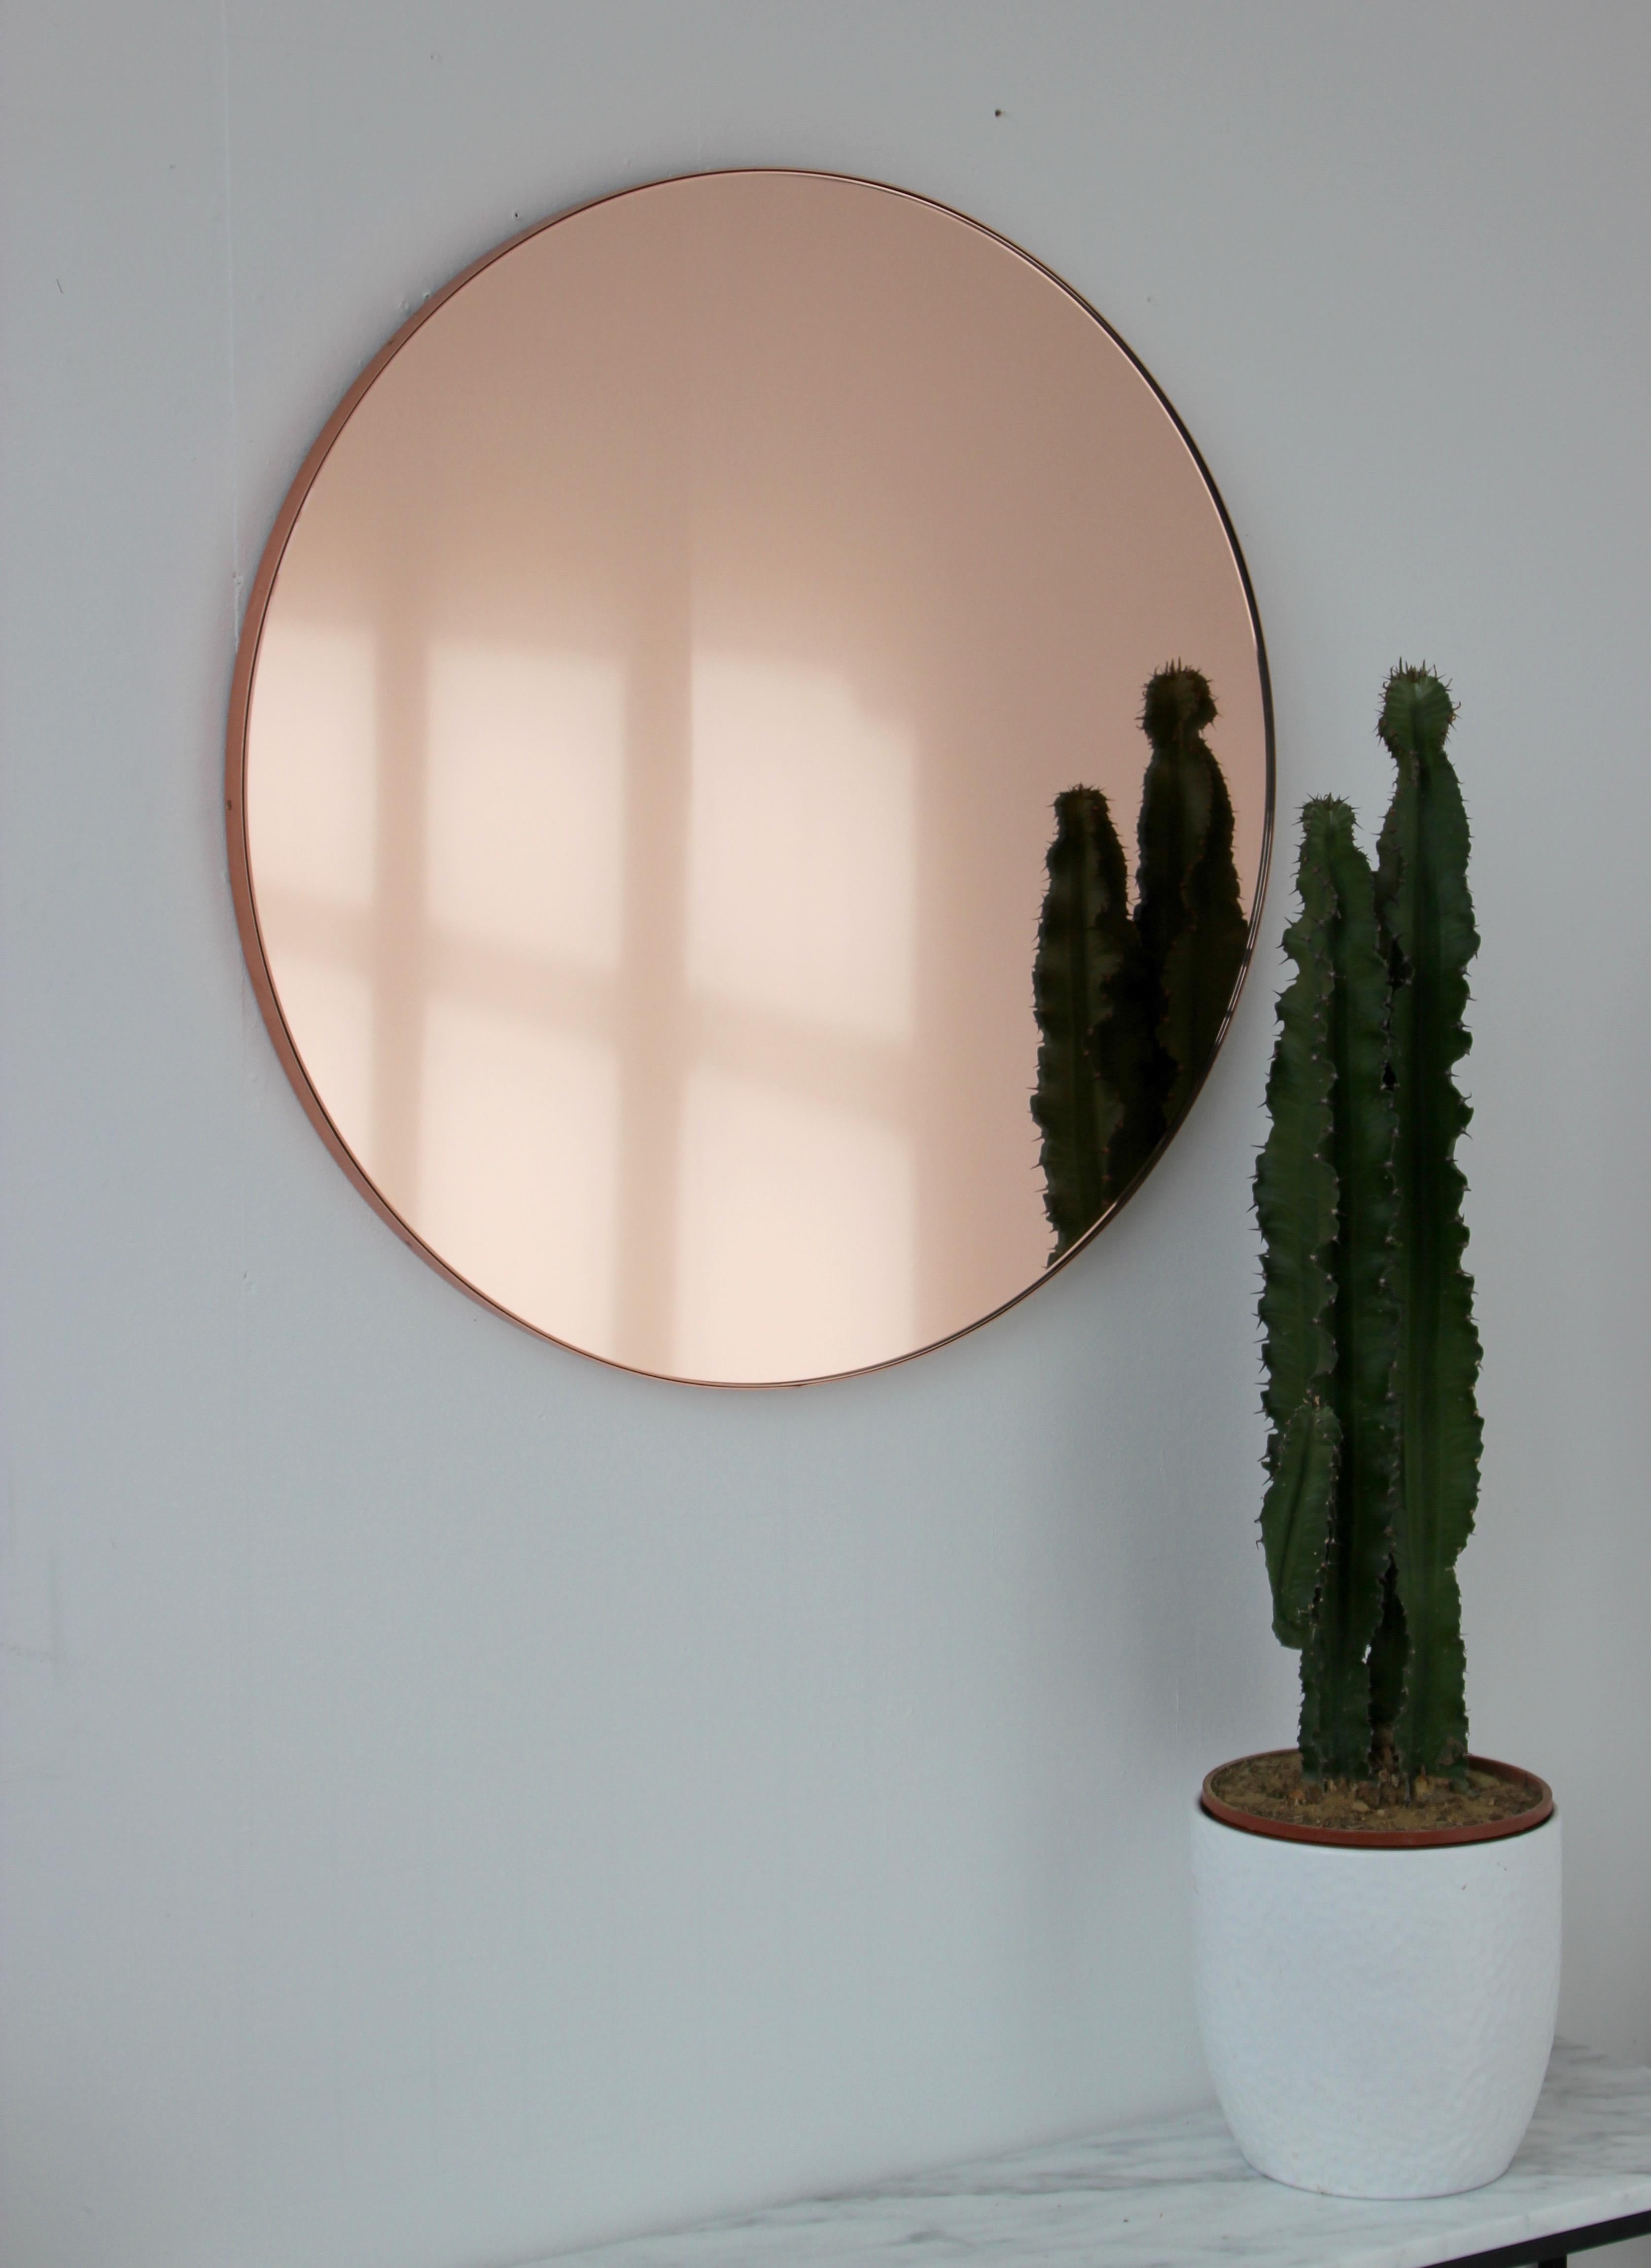 Contemporary rose gold / peach tinted round mirror with an elegant brushed copper frame. The detailing and finish, including visible copper plated screws, emphasise the crafty and quality feel of the mirror, a true signature of our brand. Designed